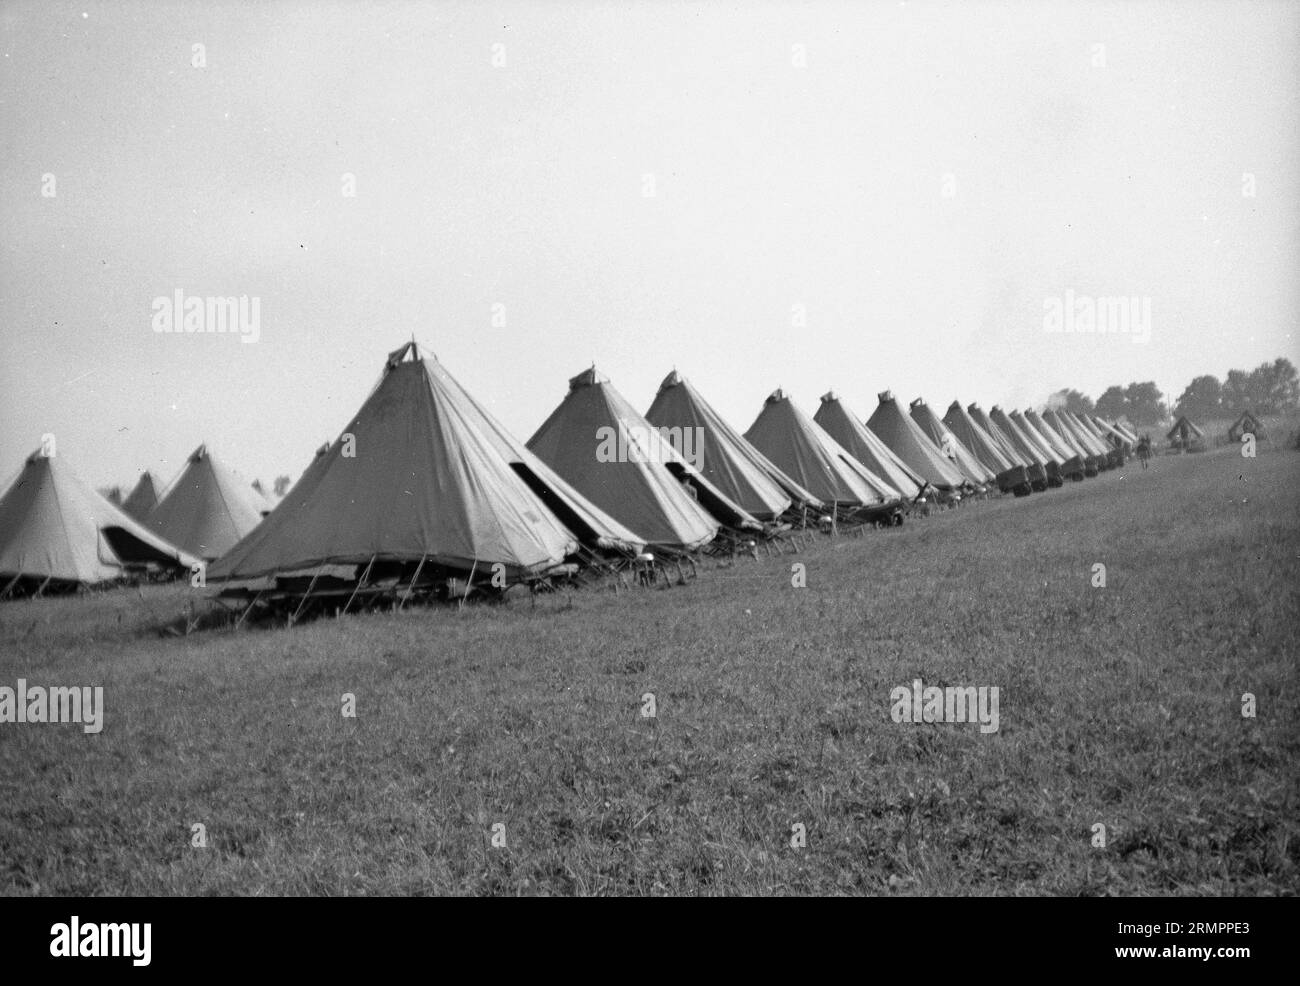 Line of tents at a camp. Members of the United States Army’s 114th infantry division train to fight against Germany in Europe during WWII. Stock Photo